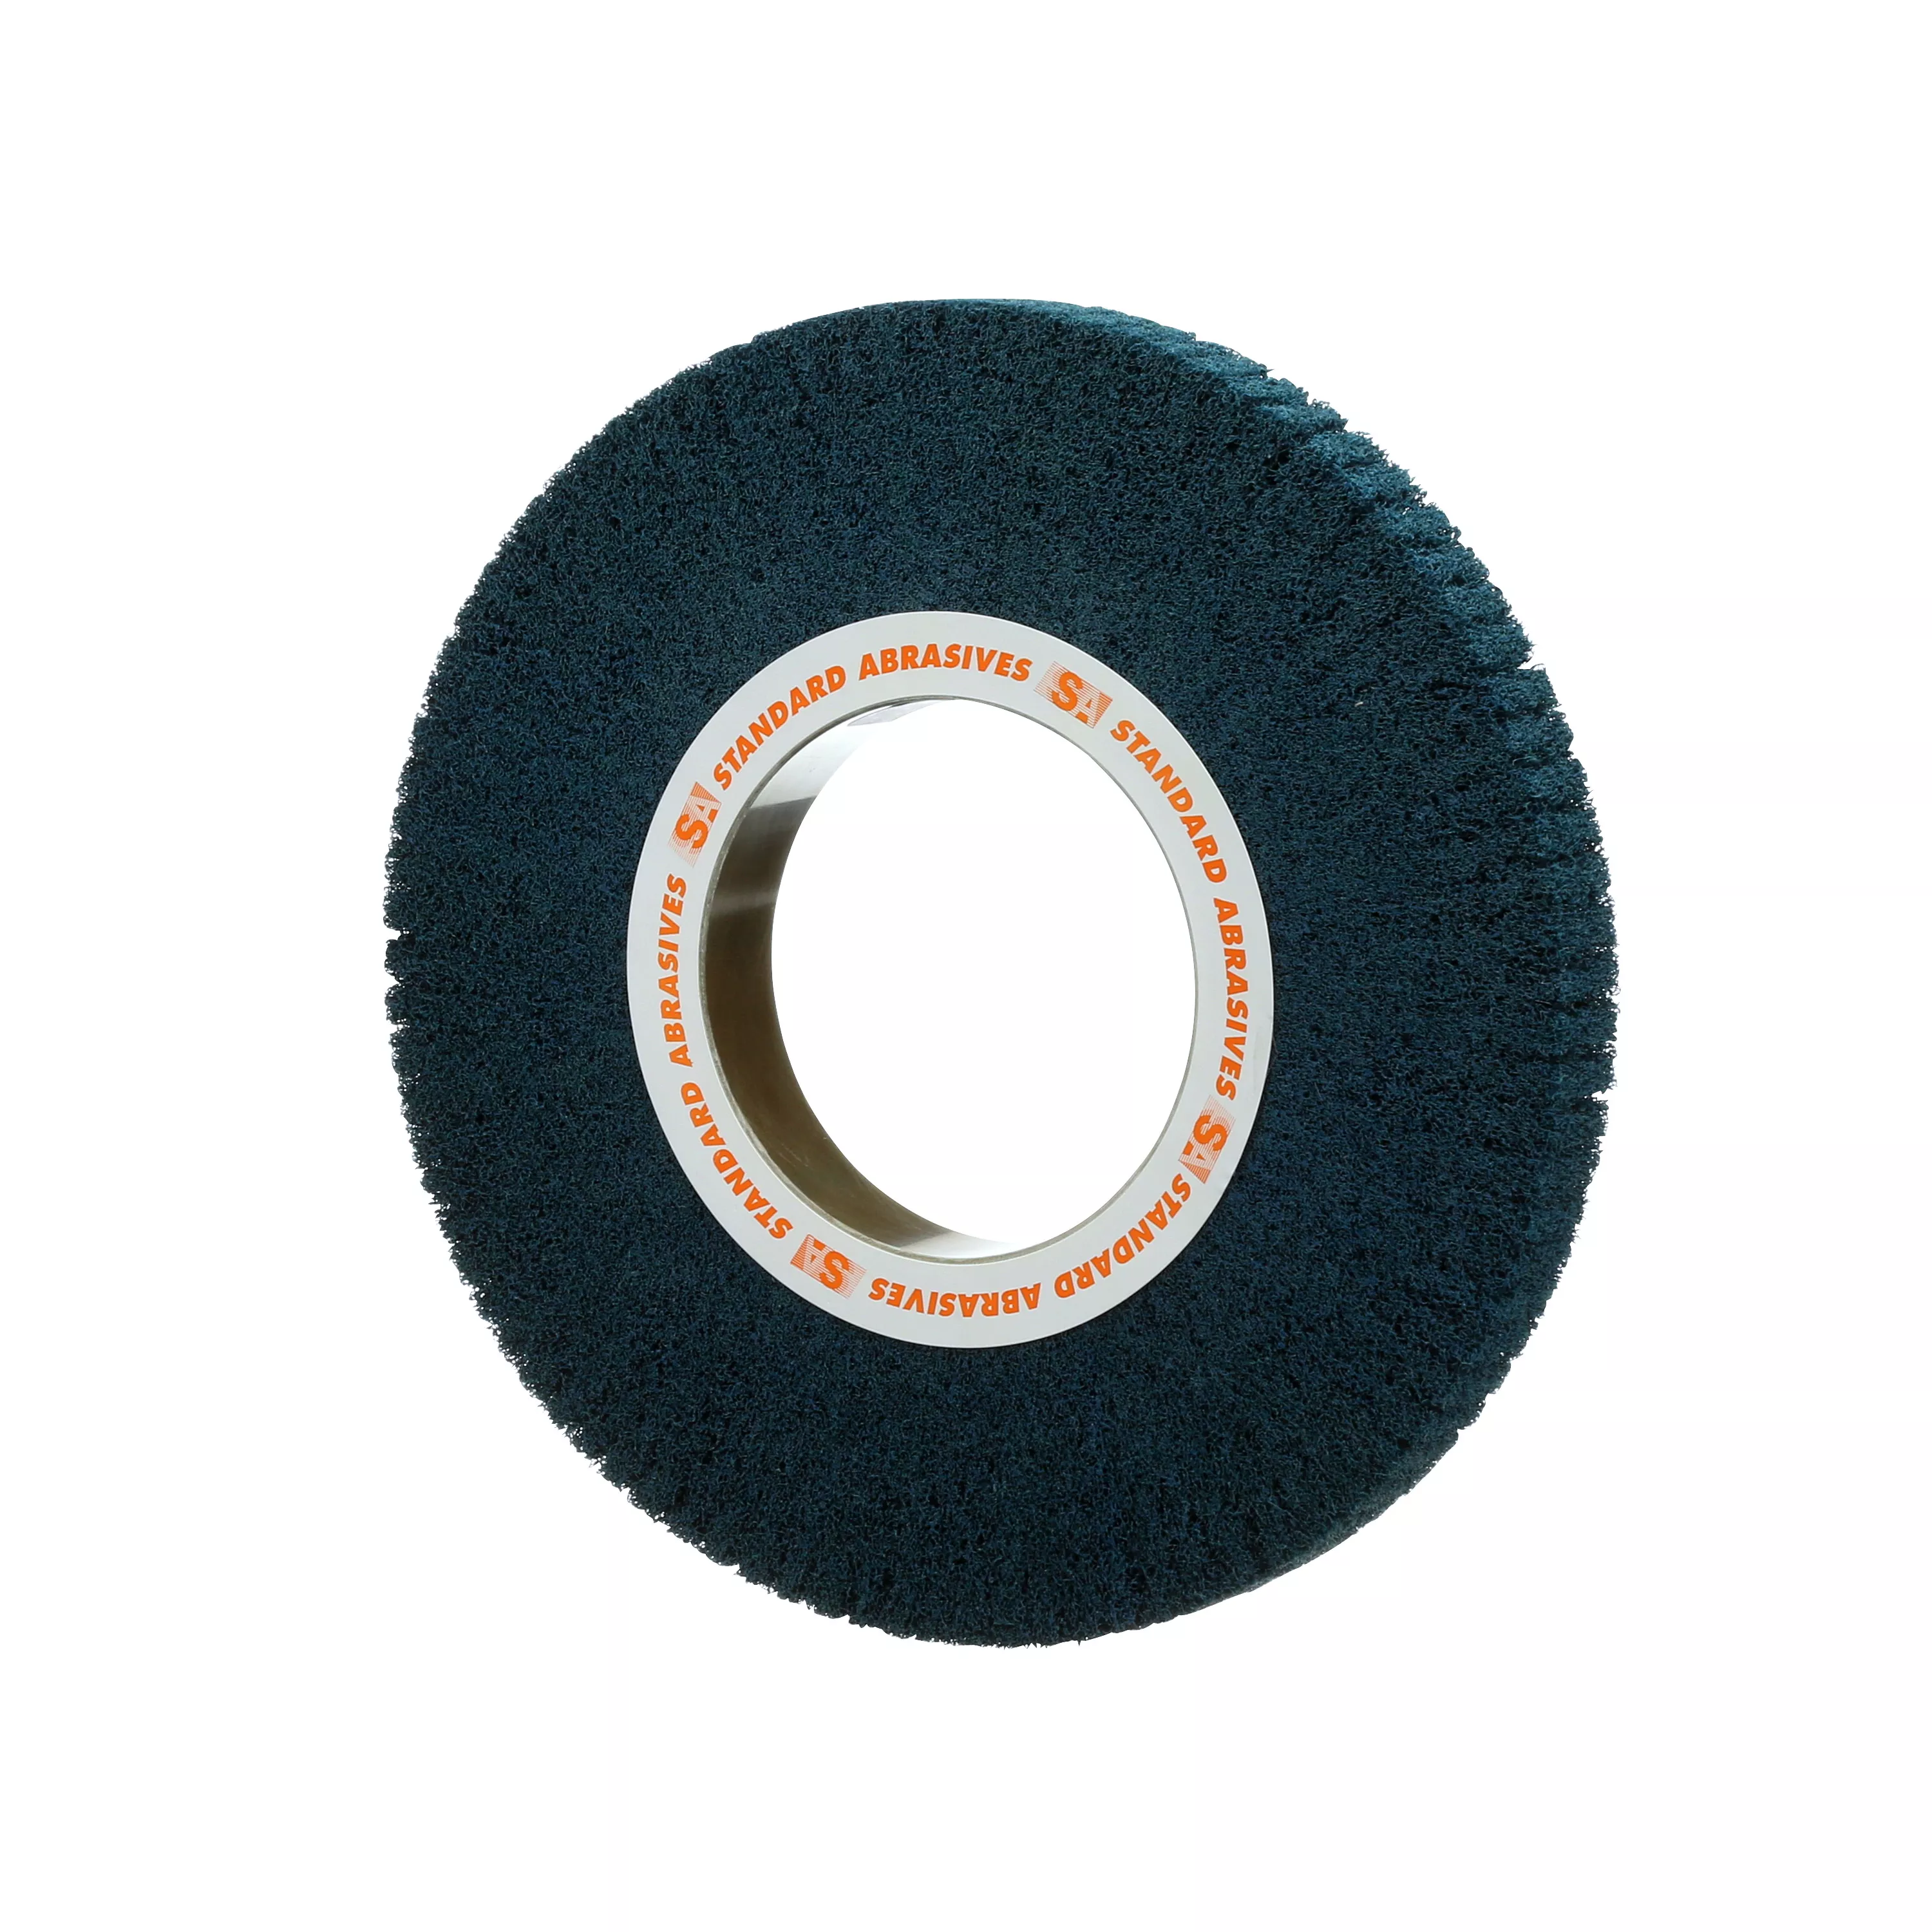 Product Number 875373 | Standard Abrasives™ Buff and Blend Flap Brush 875373 12 in x 1-3/16 in x
5 in A/O VFN Hard Density